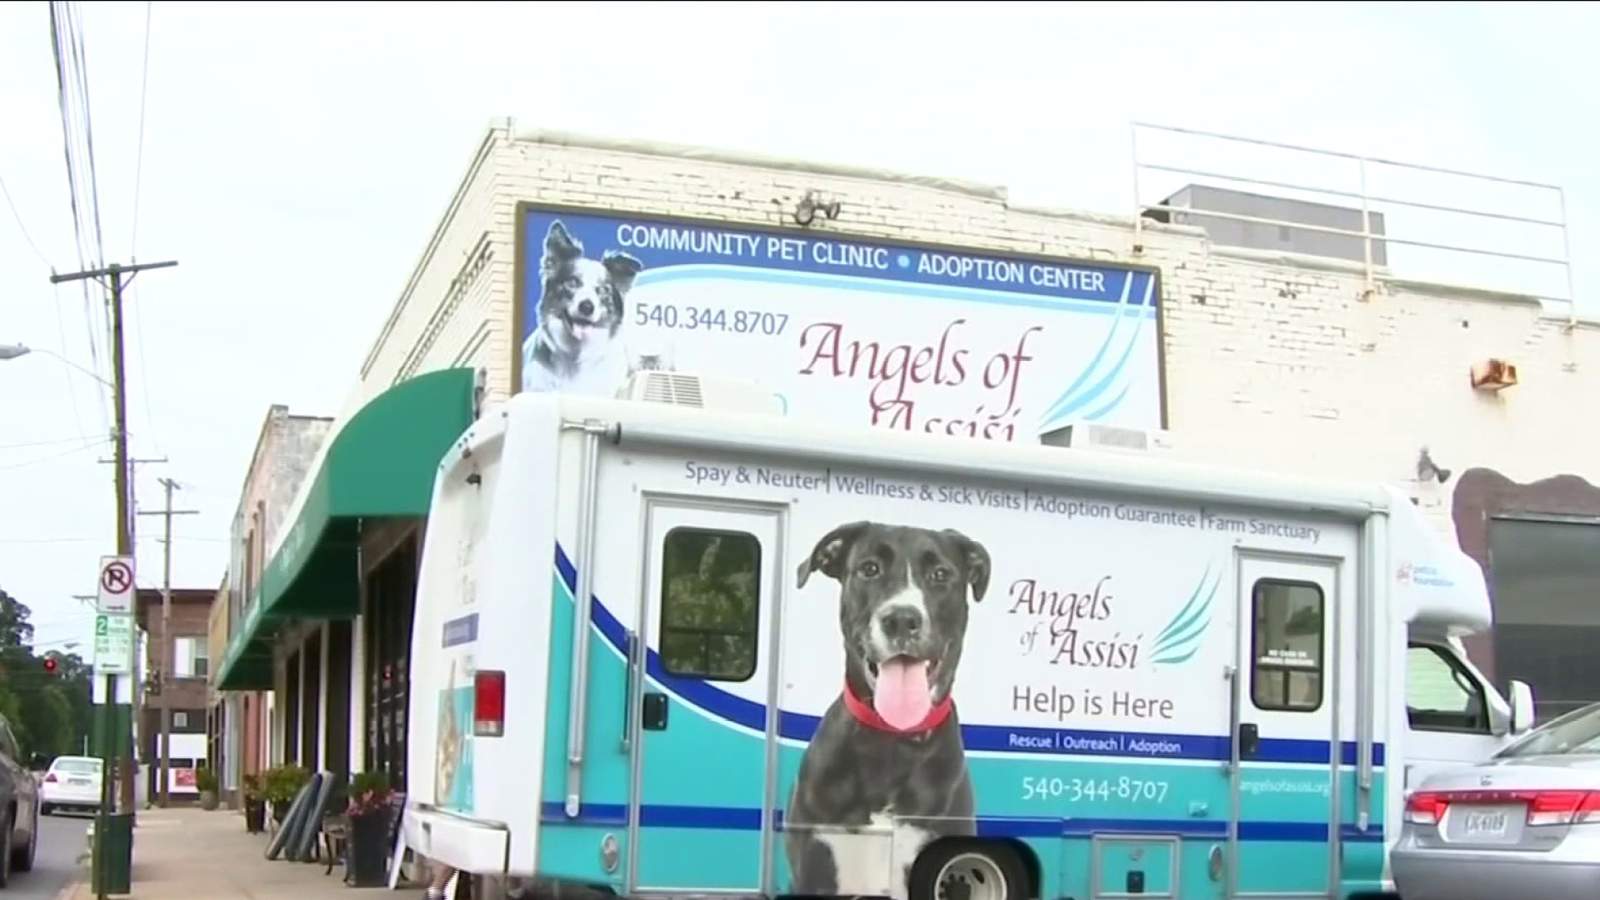 Angels of Assisi receives $500,000 grant to continue its work helping animals